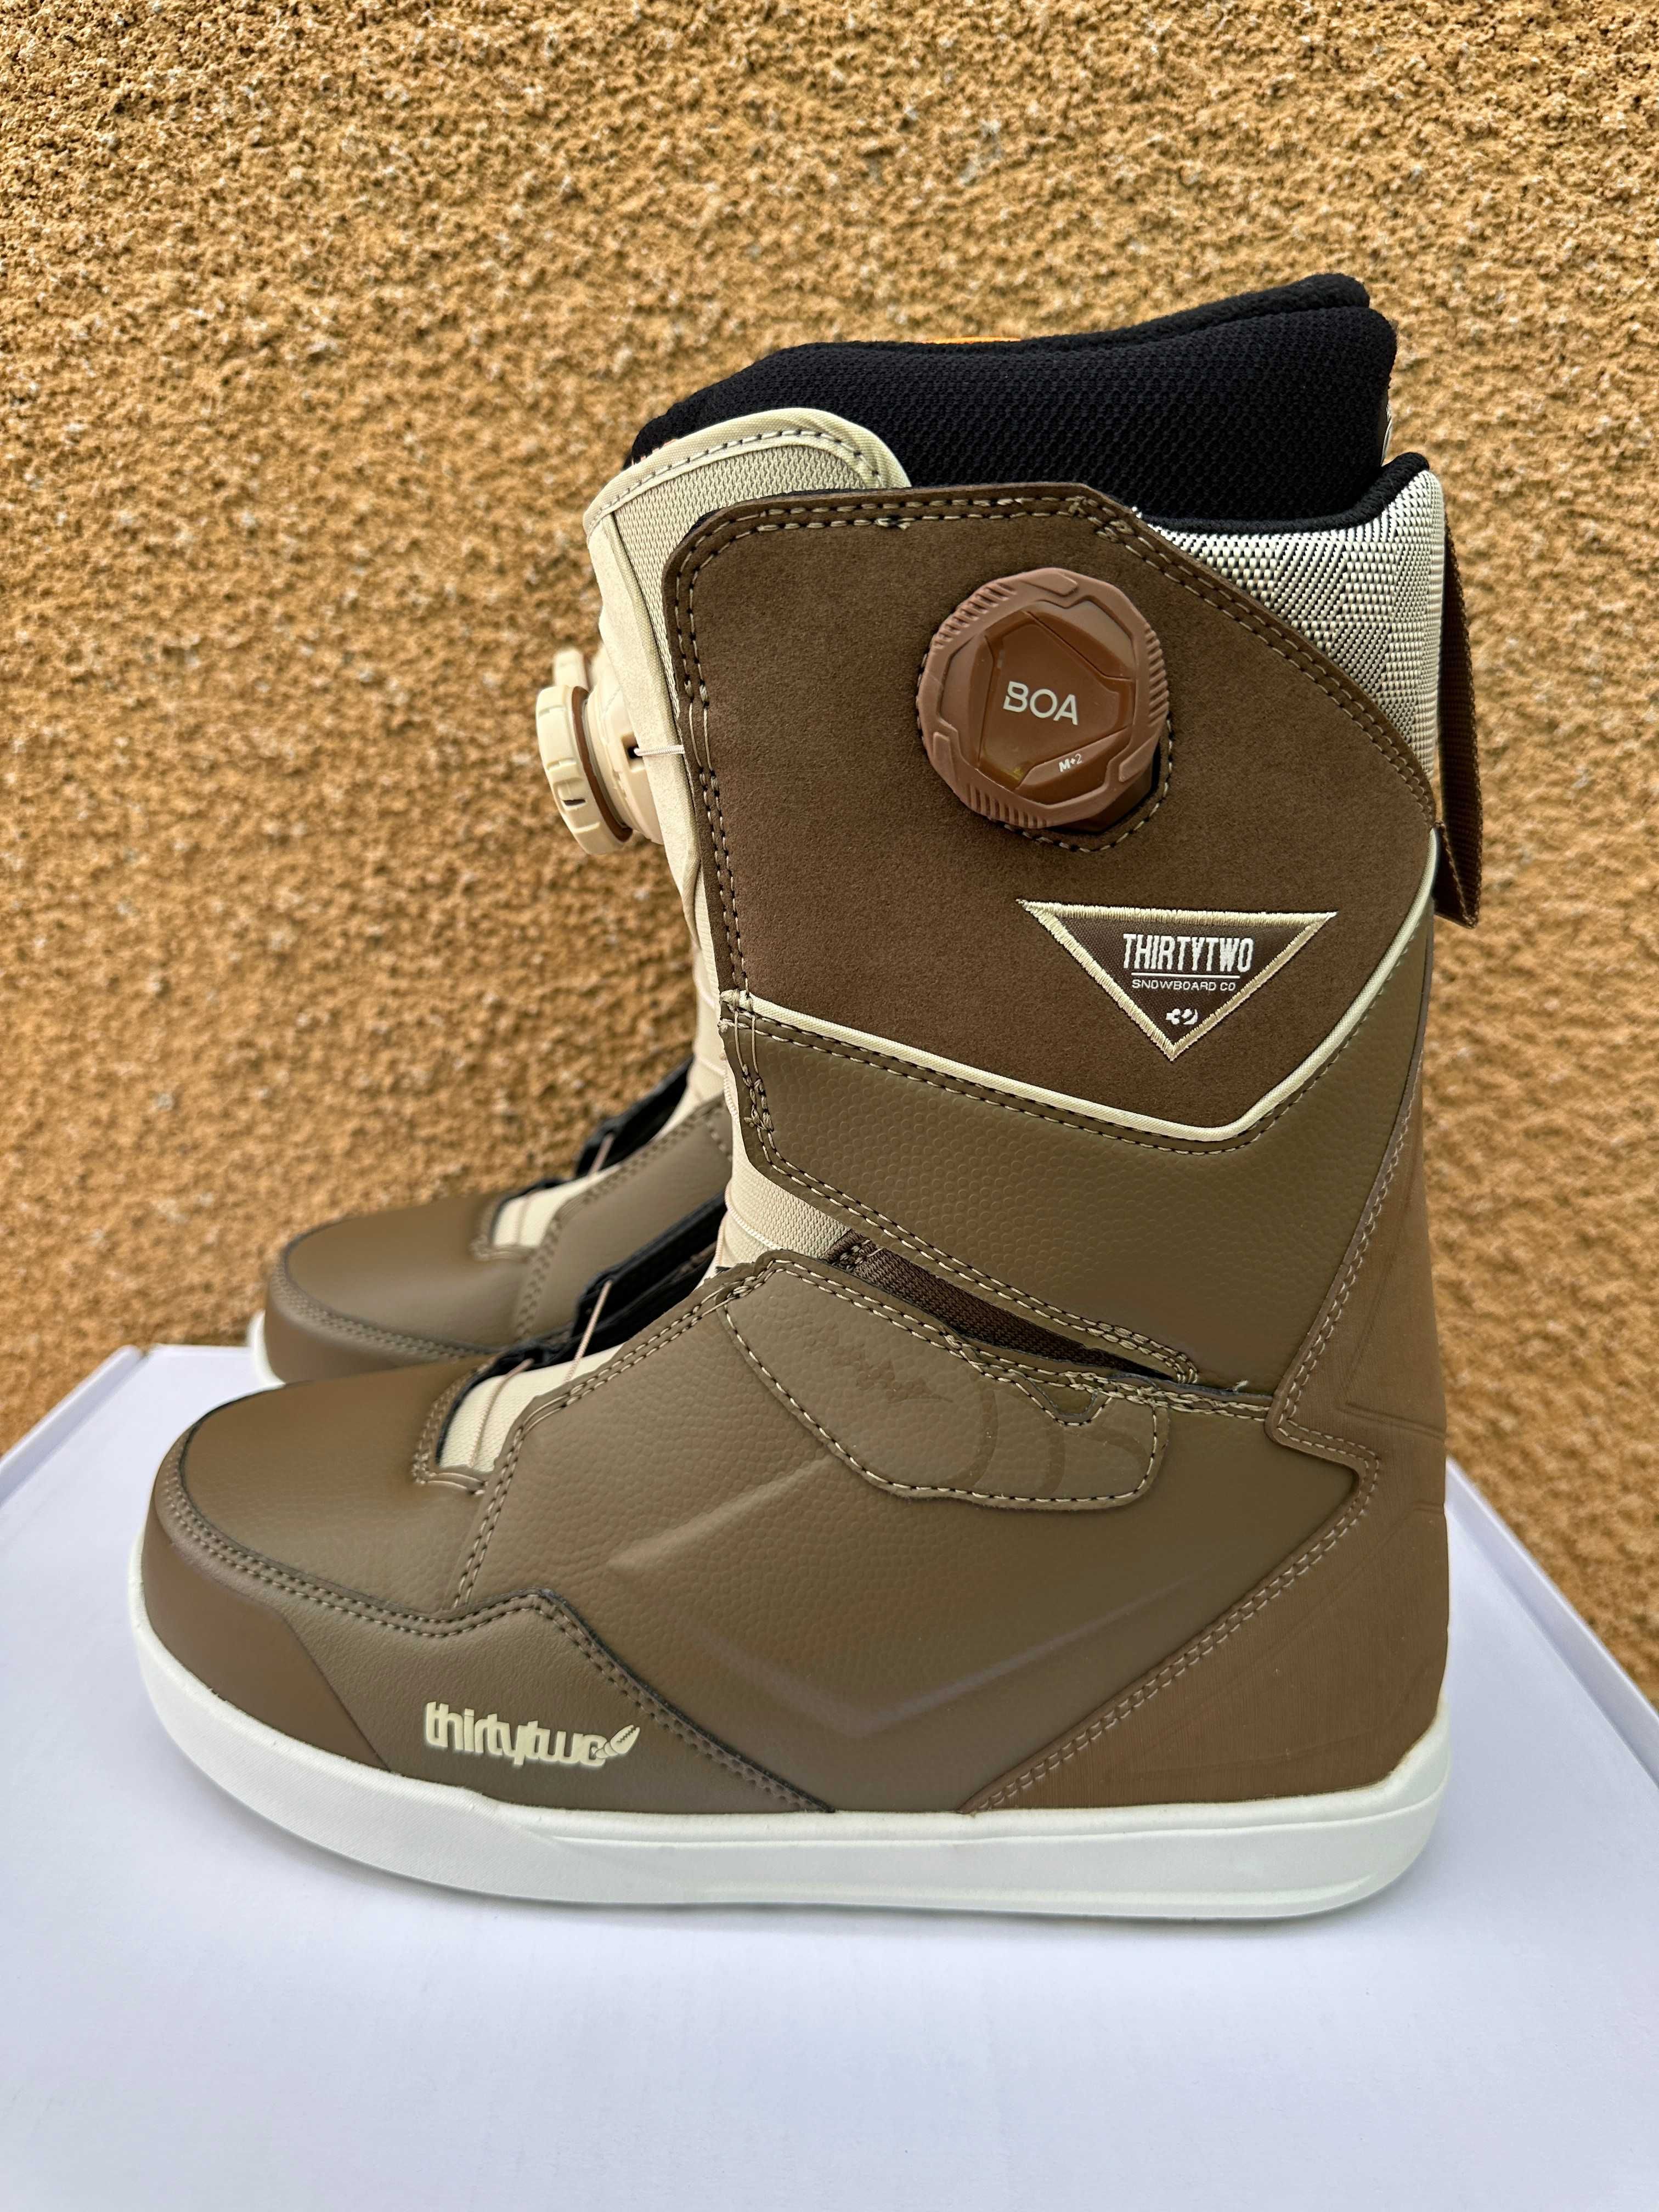 boots noi thirtytwo lashed double boa crab grab europa 43